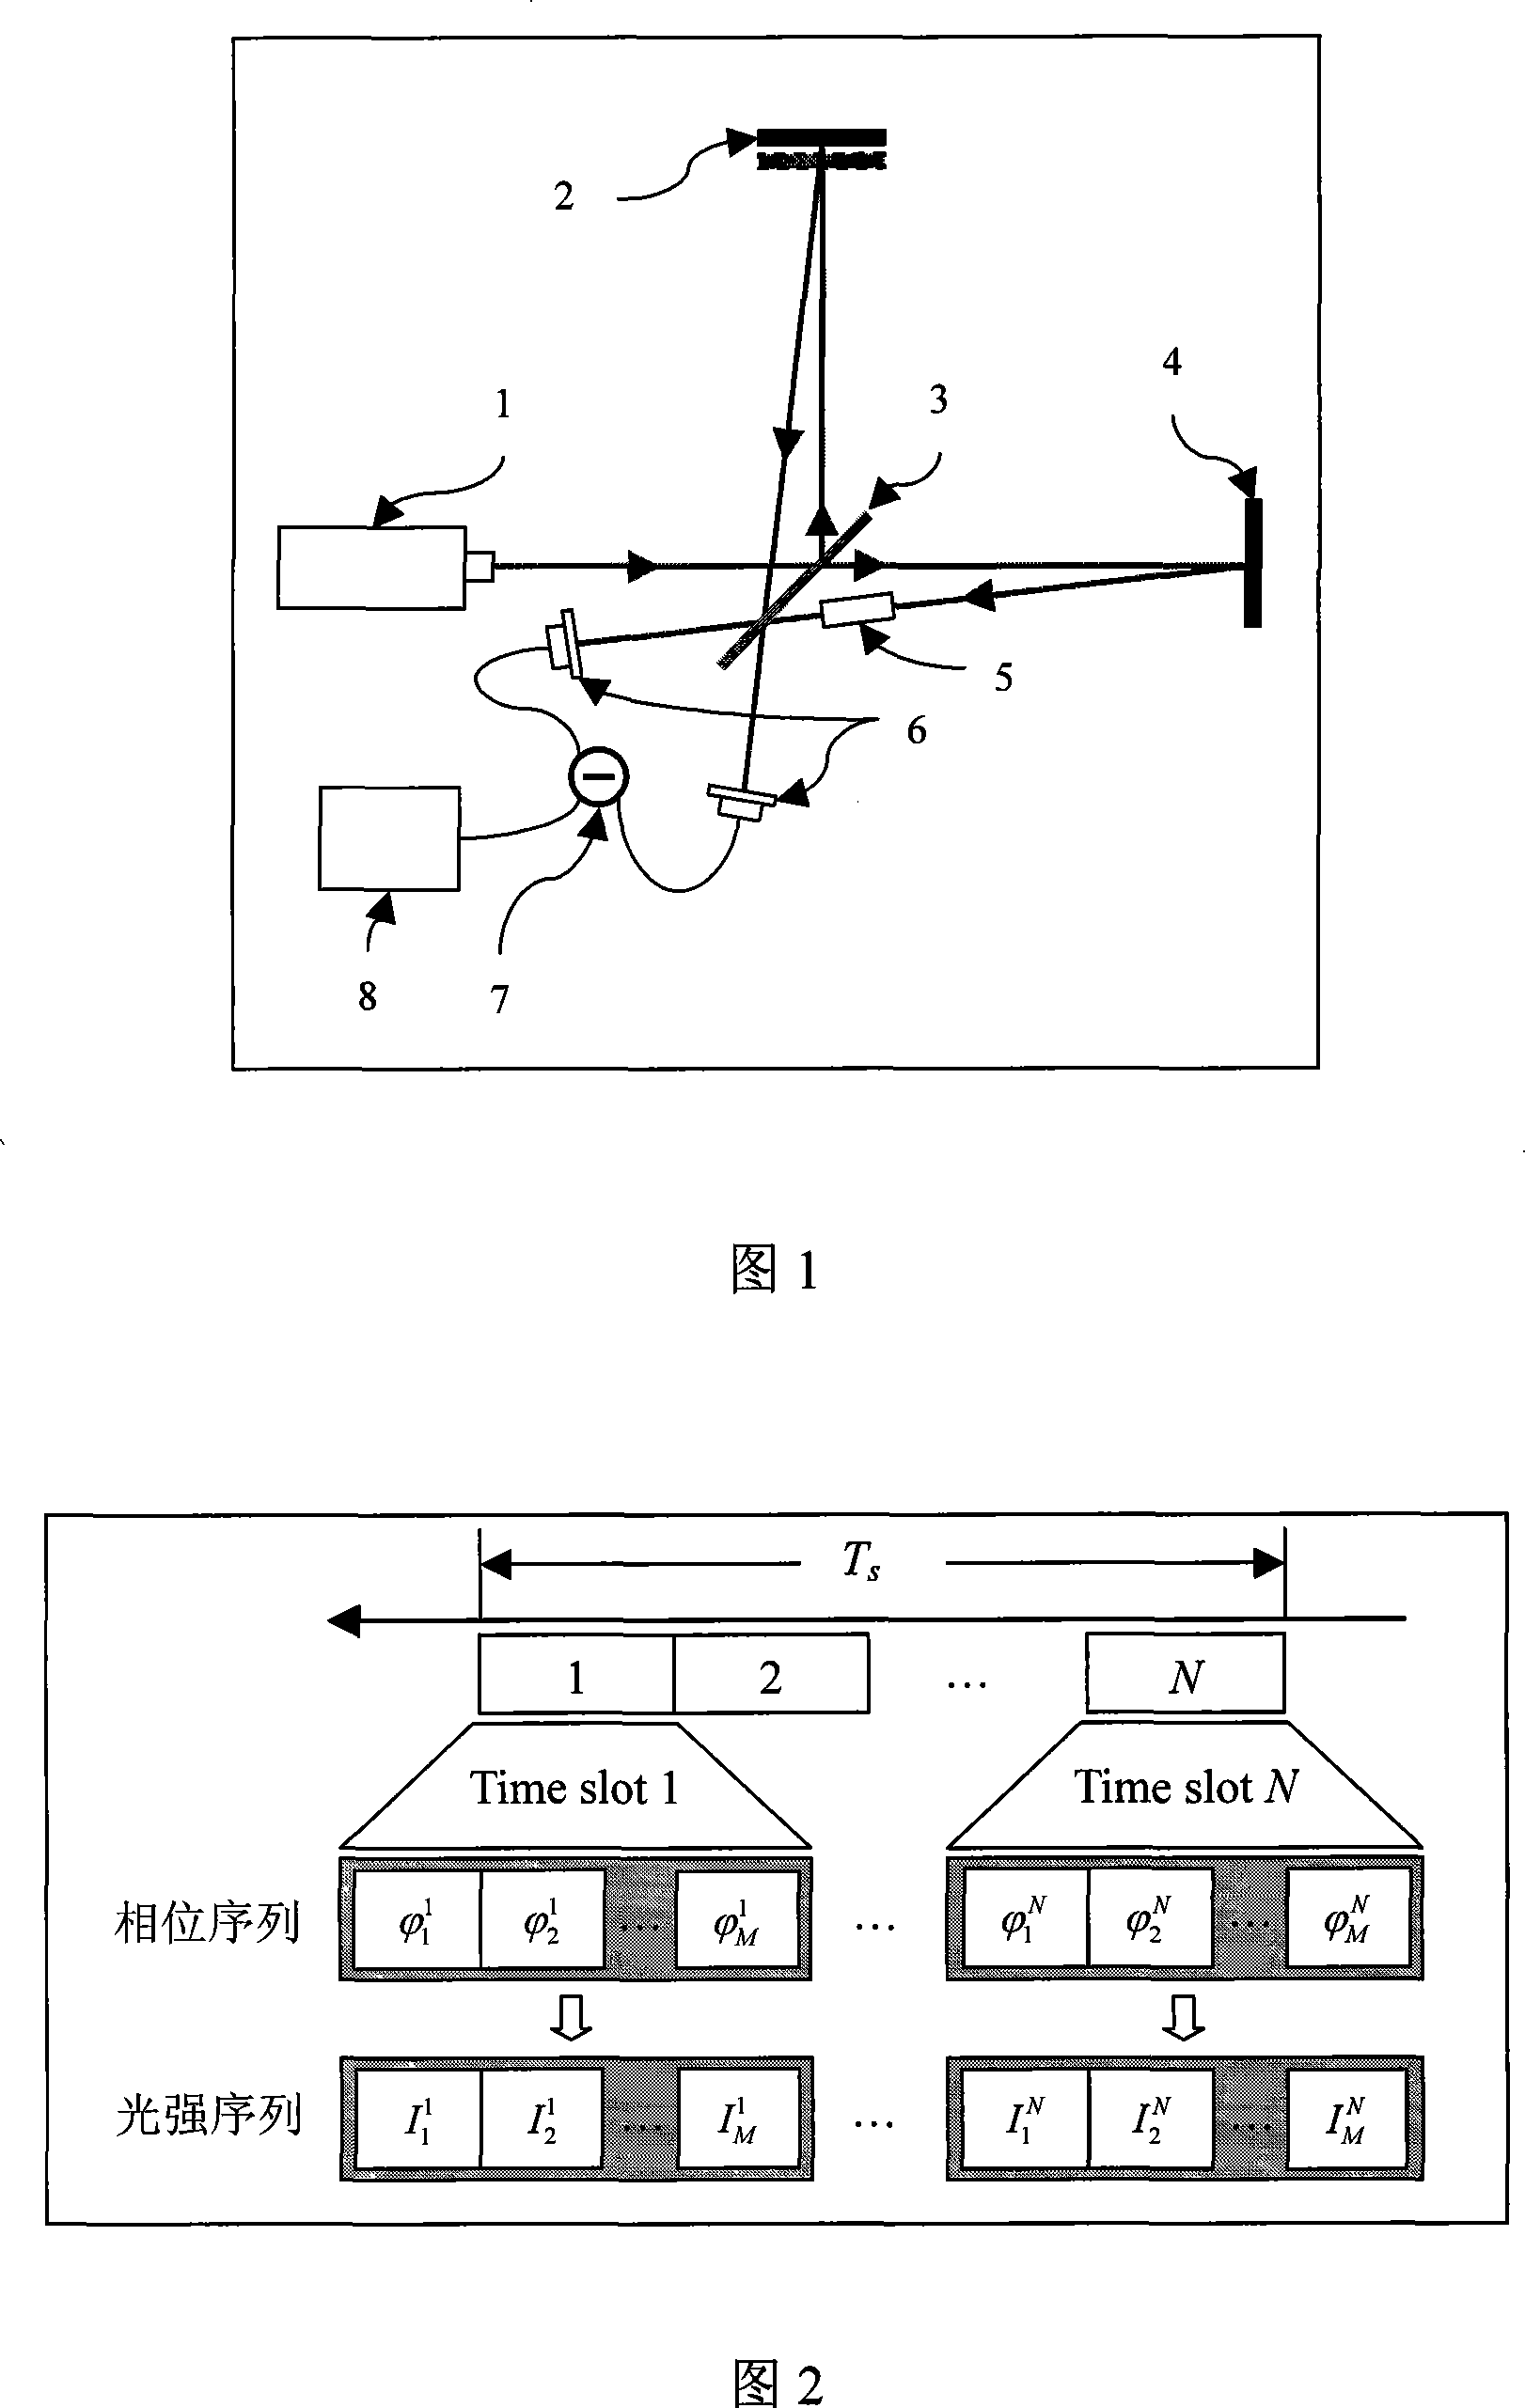 Optical interference measuring device and its method